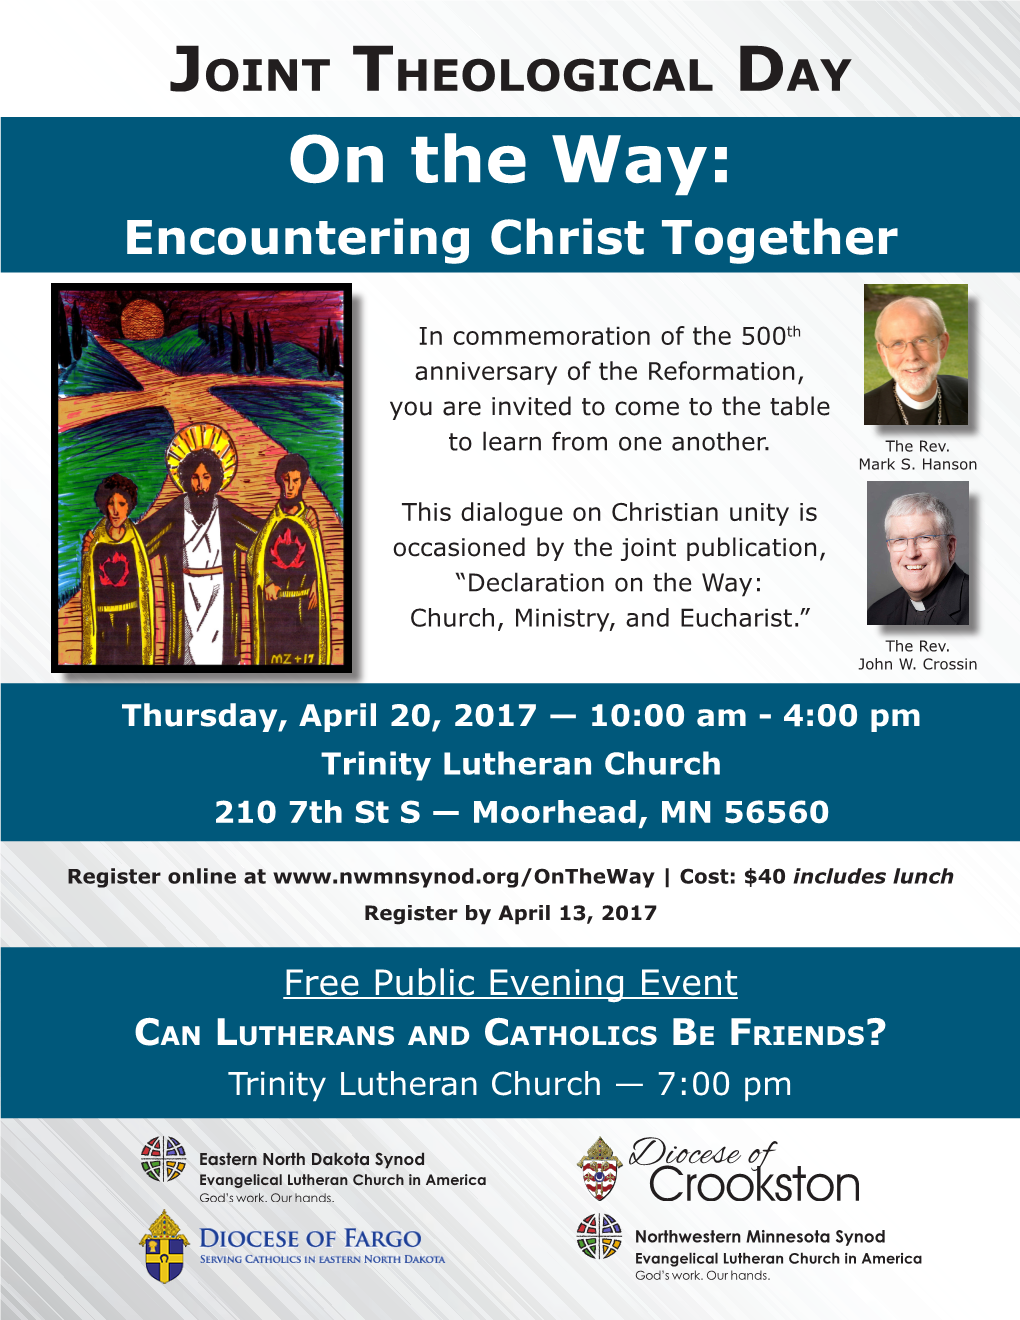 On the Way: Encountering Christ Together